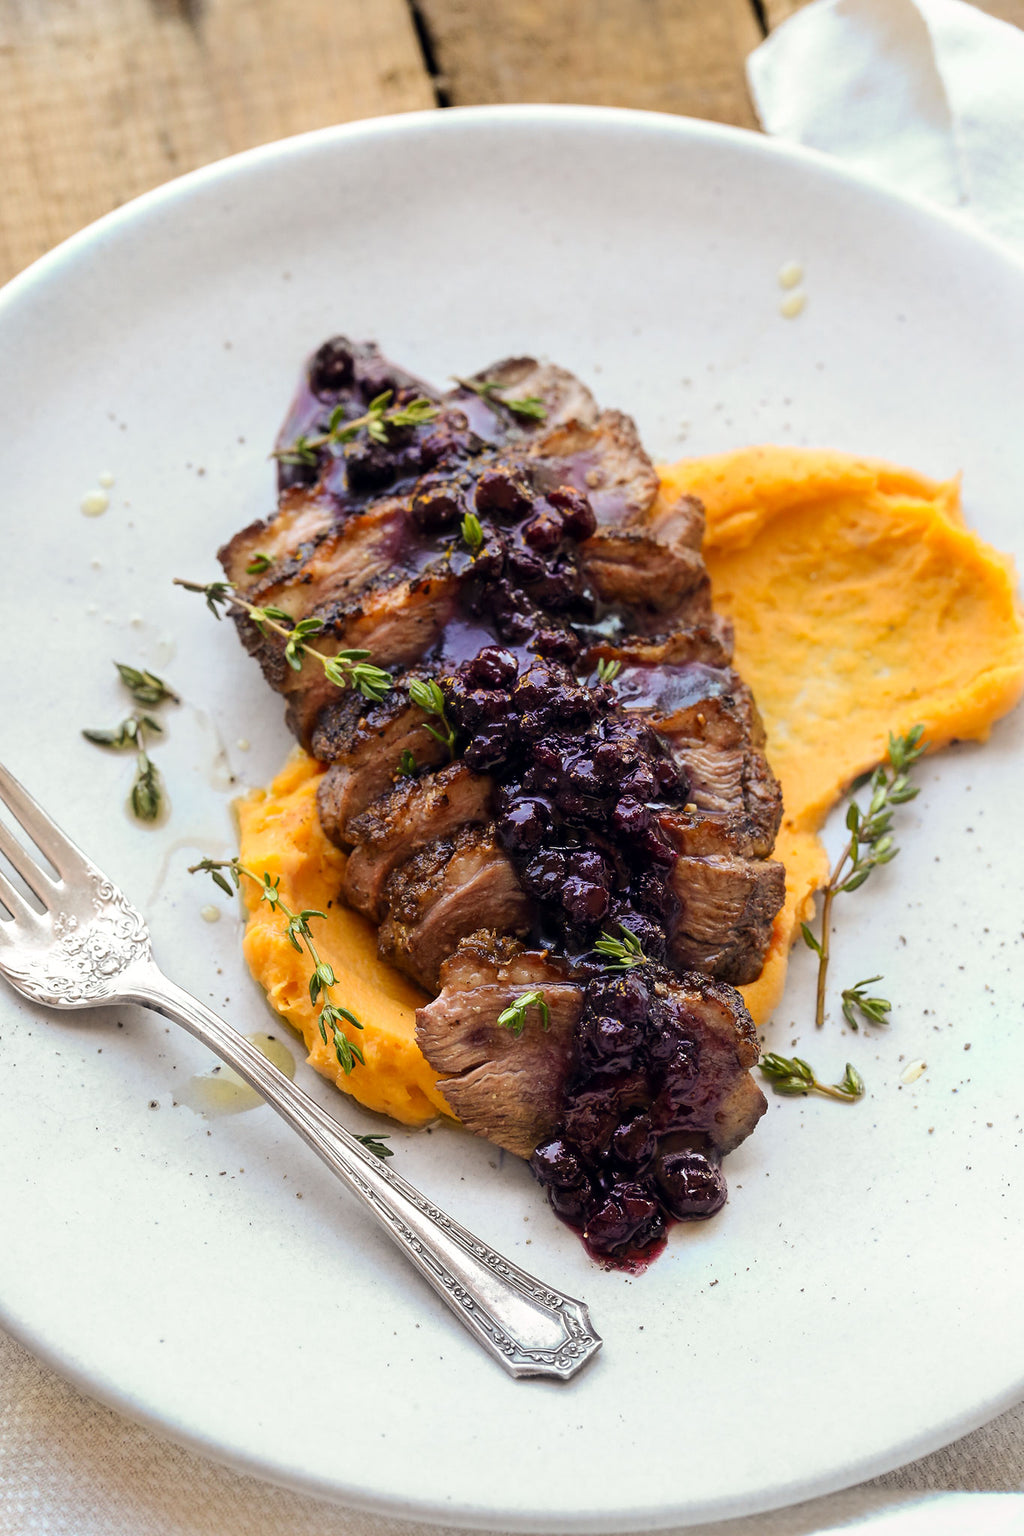 Pan Seared Spiced Duck Breast with Wild Blueberry Sauce and Sweet Potato Puree